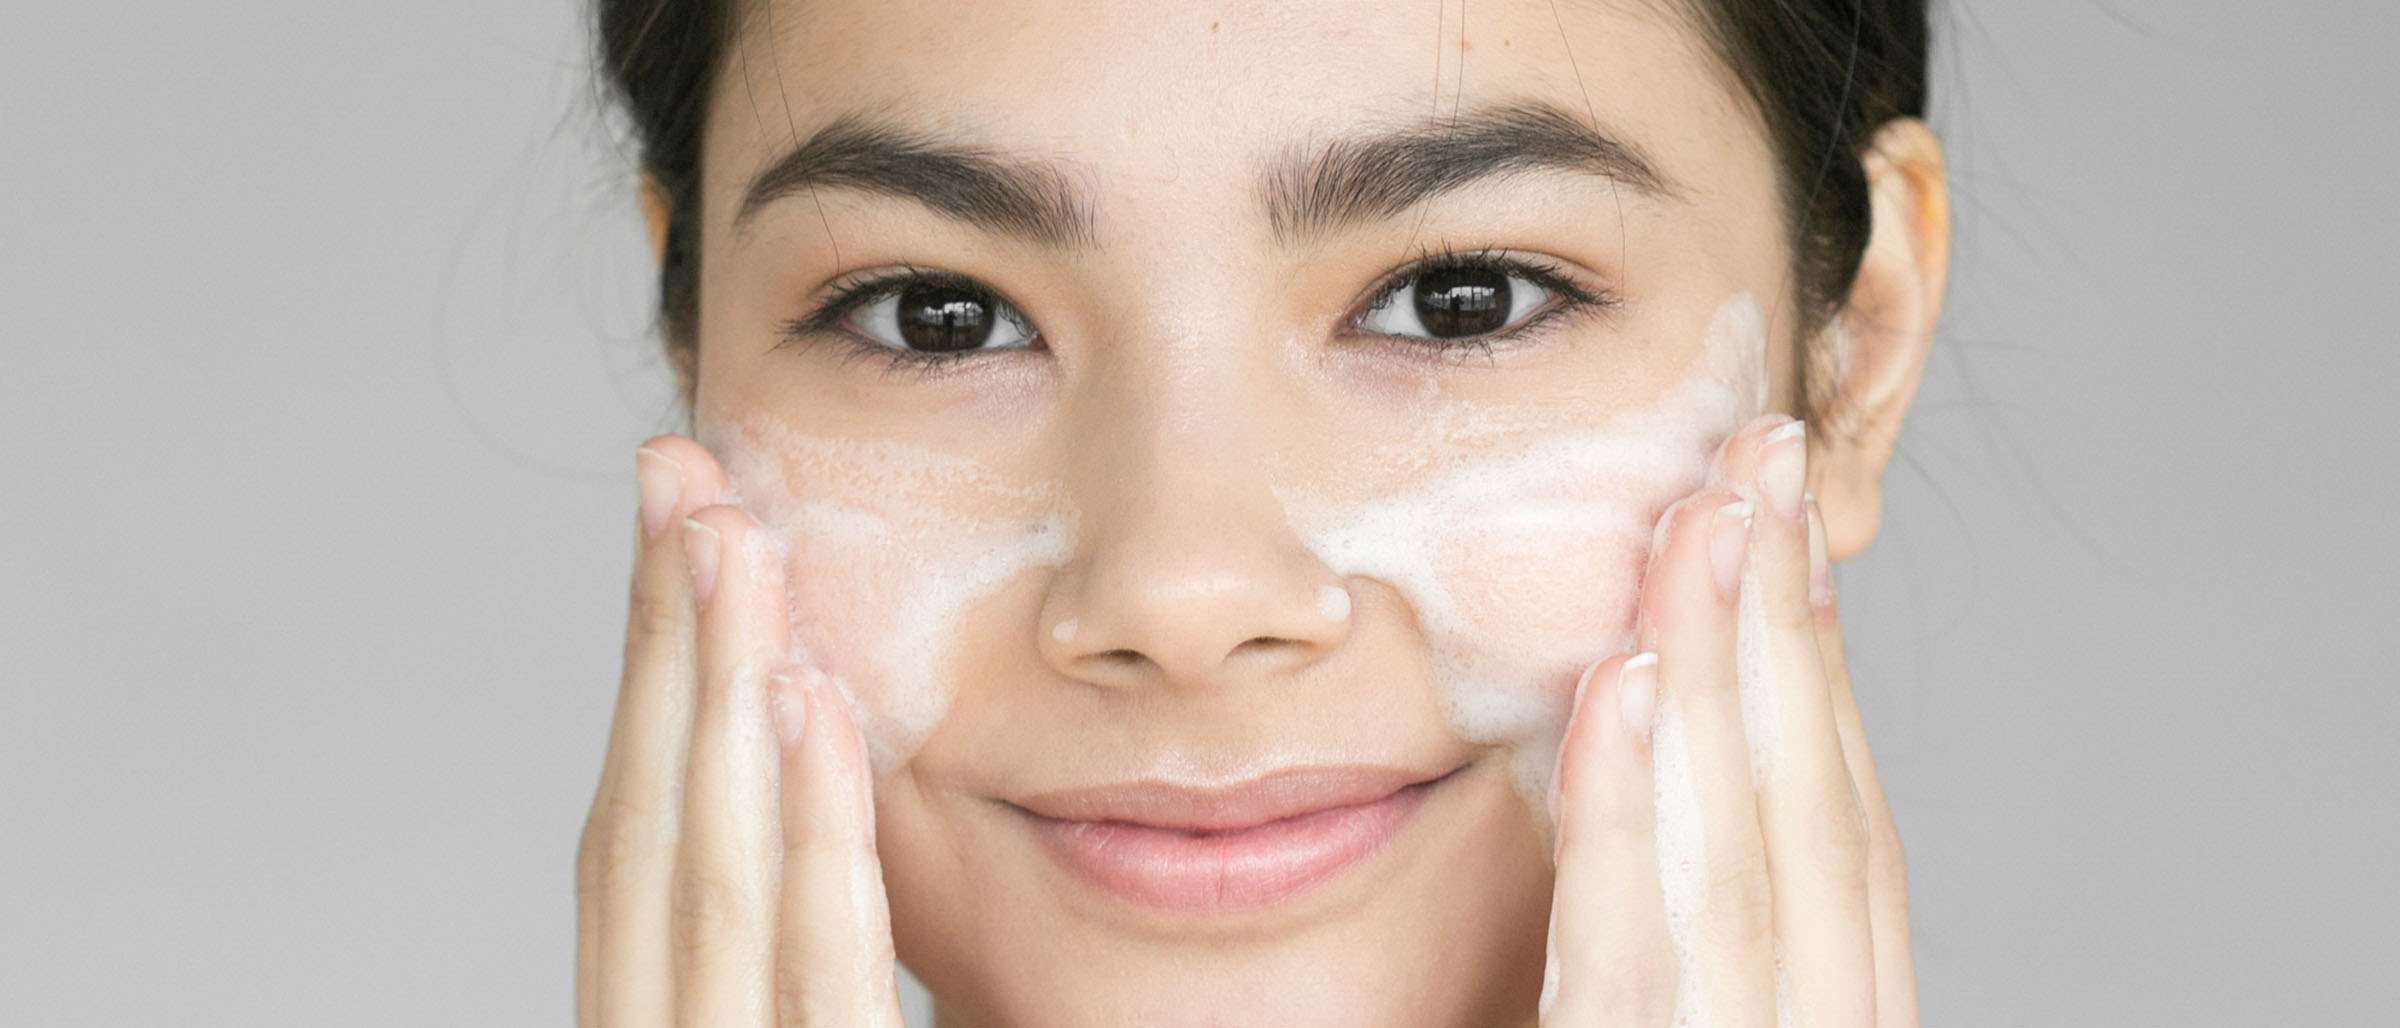 Is Your Acne Itchy? Here Is What You Need To Know!